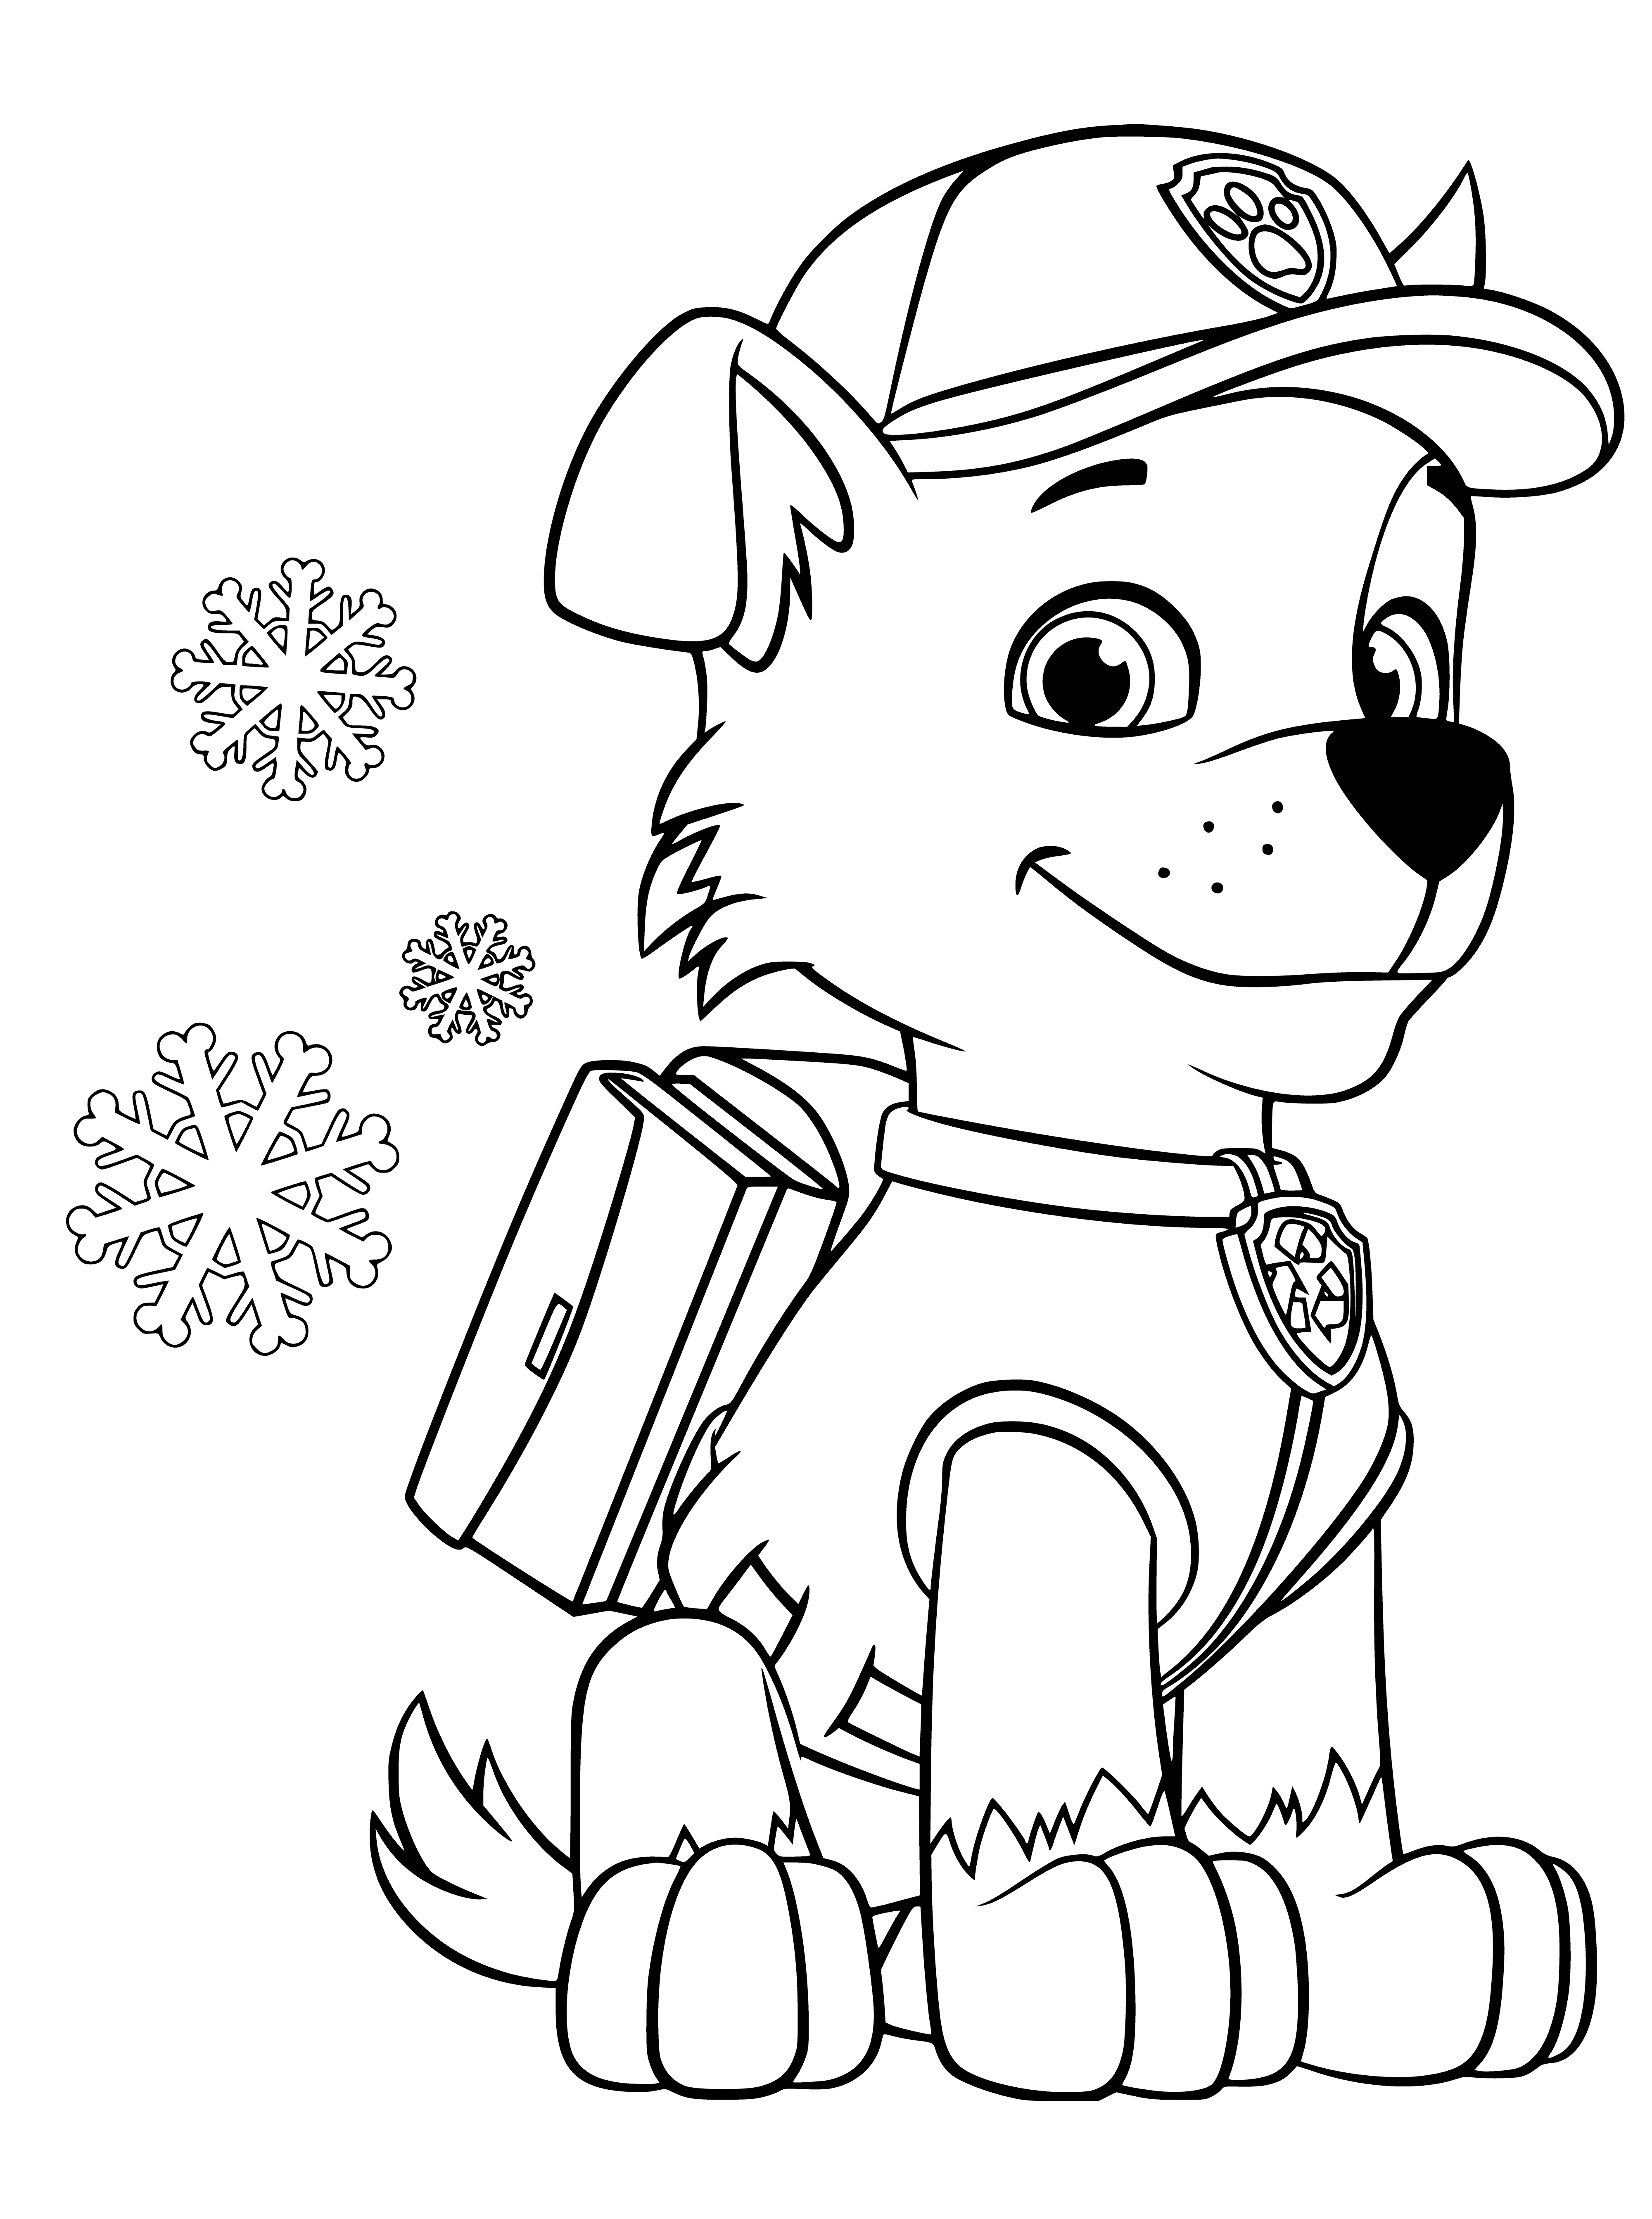 coloring page: Rocky is a border collie pup, recycling expert for PAW Patrol. He sorts materials, plays drums, & always ready to lend a paw!